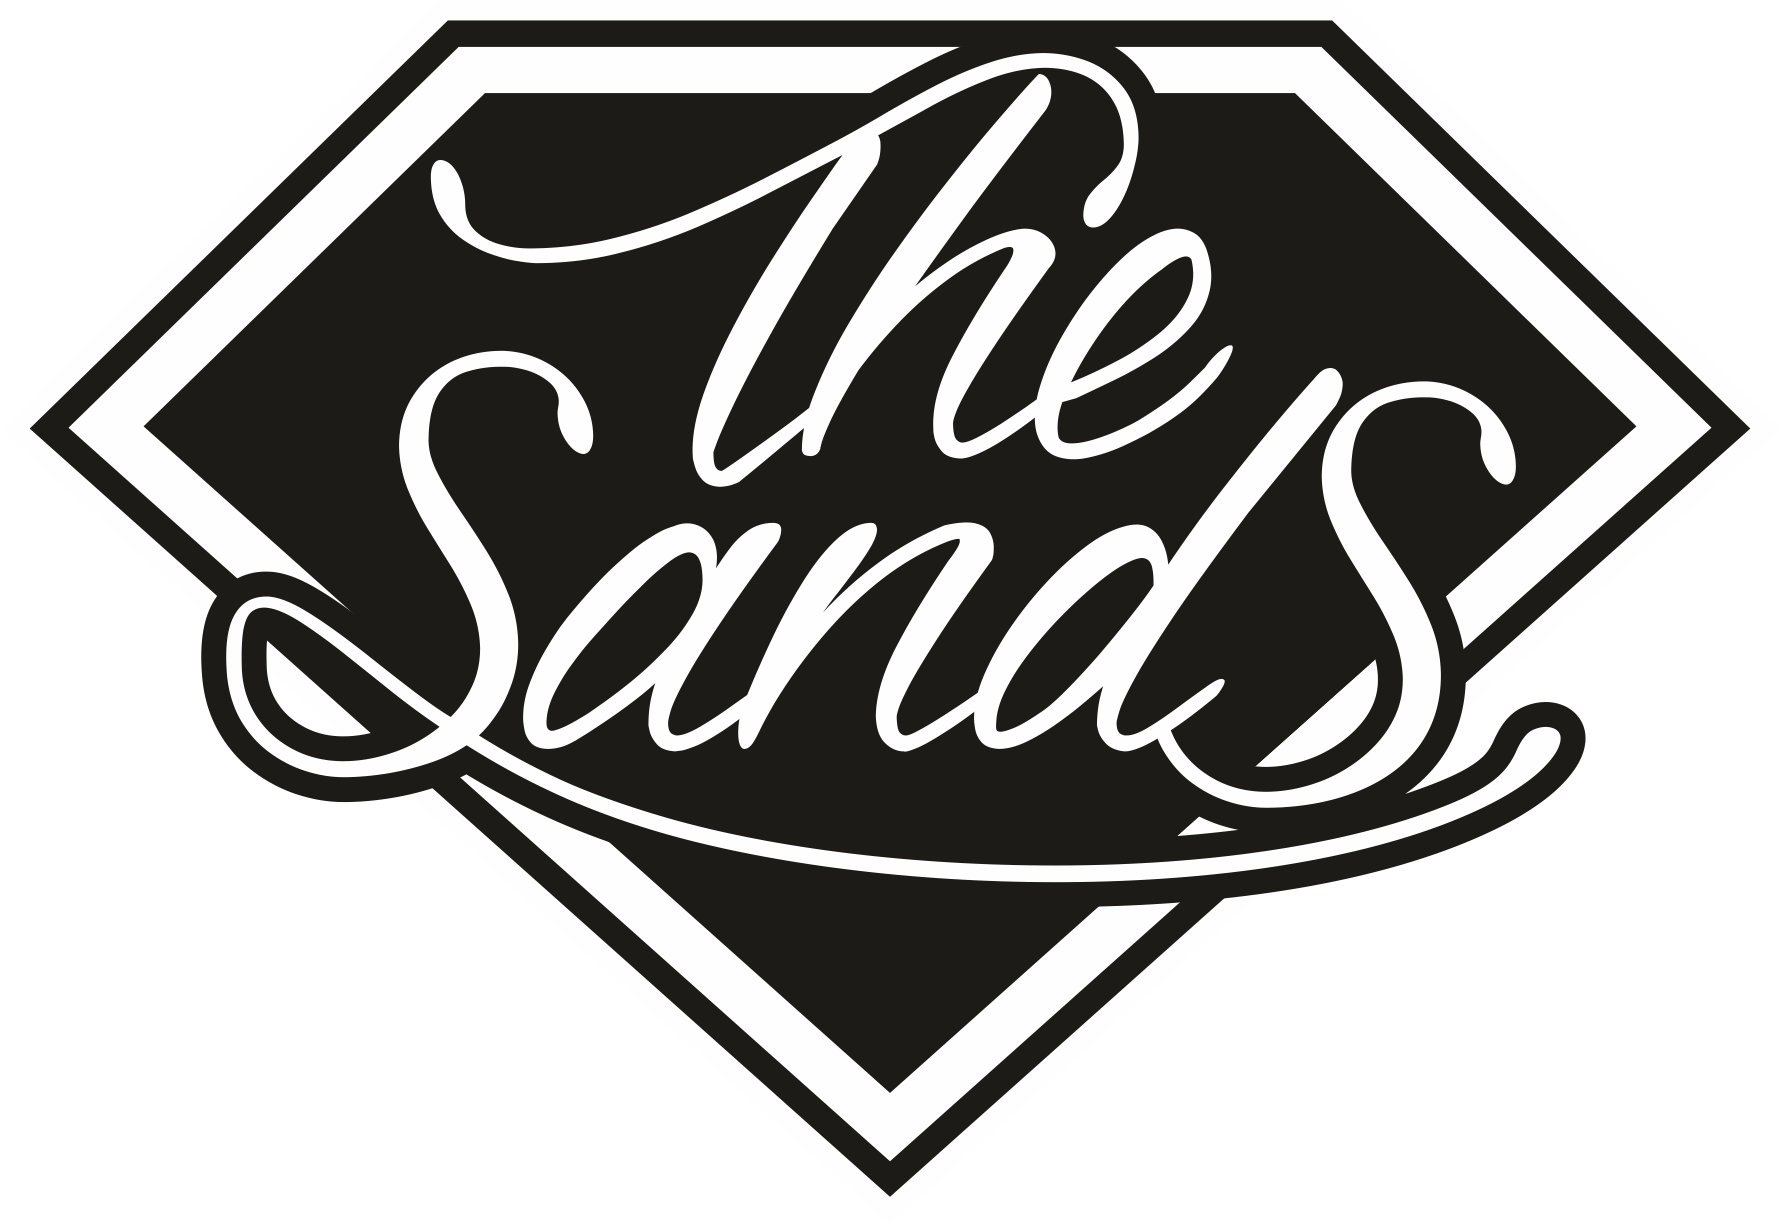 The SandS